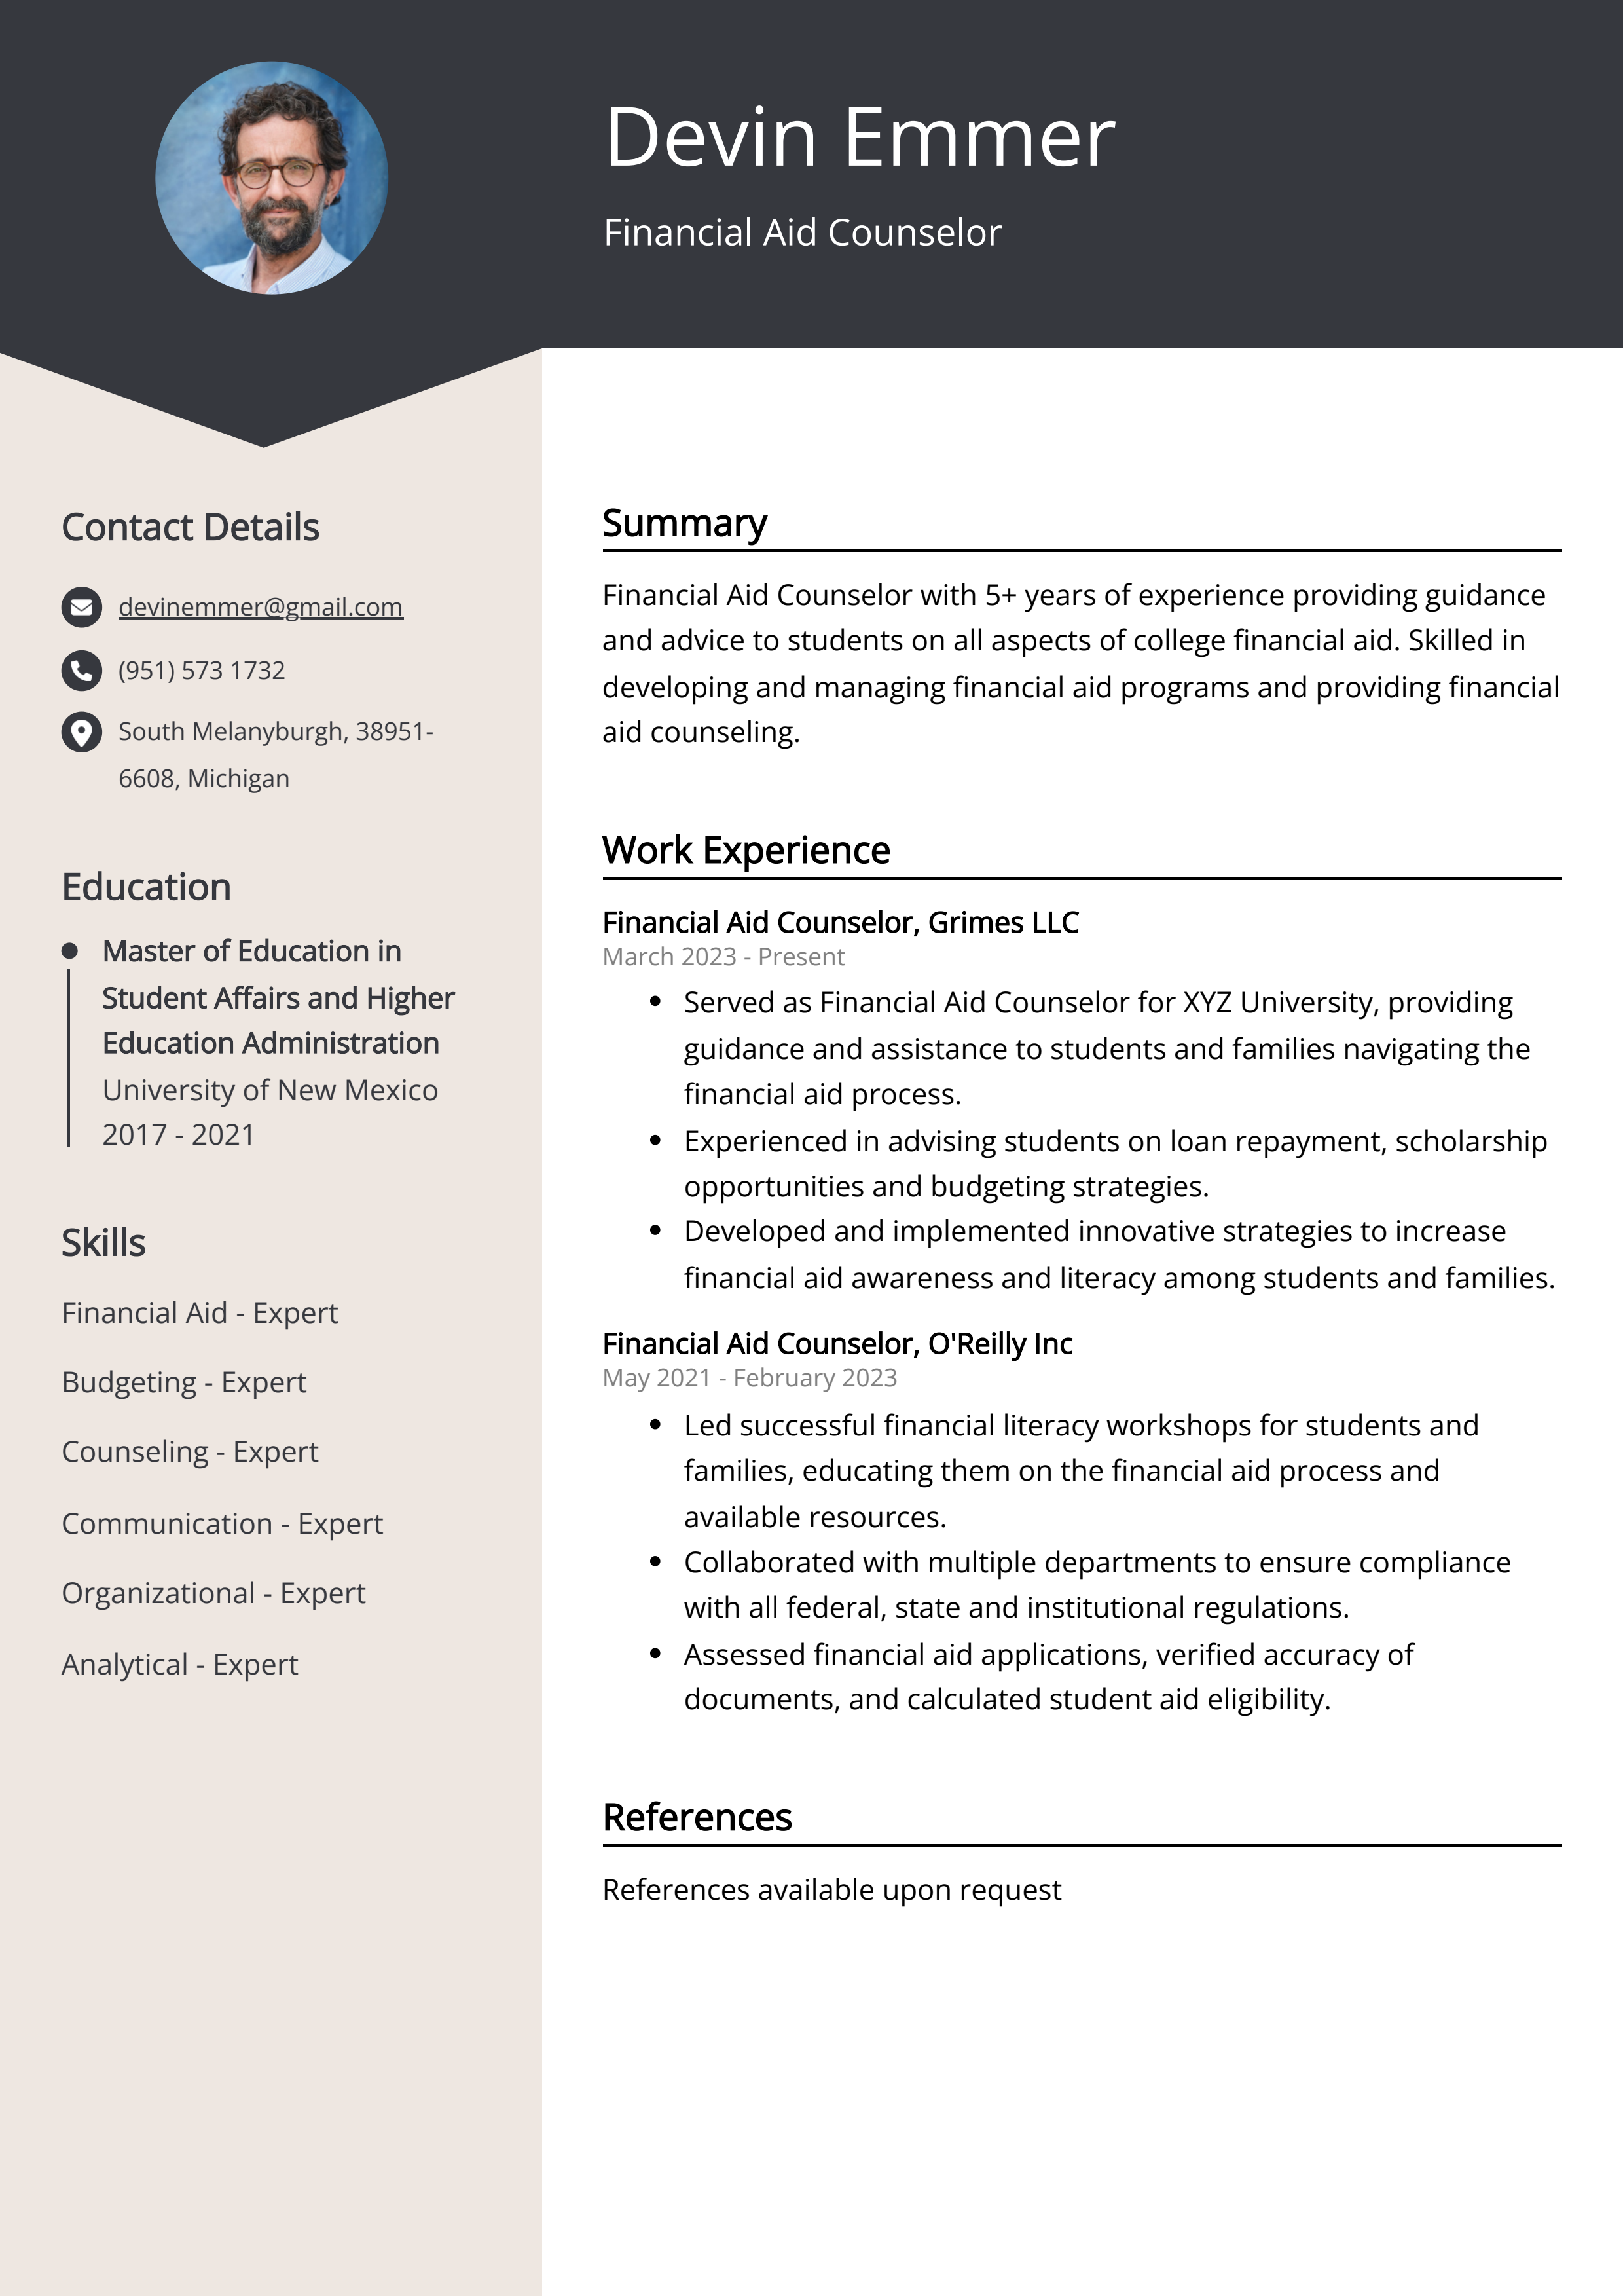 Financial Aid Counselor CV Example